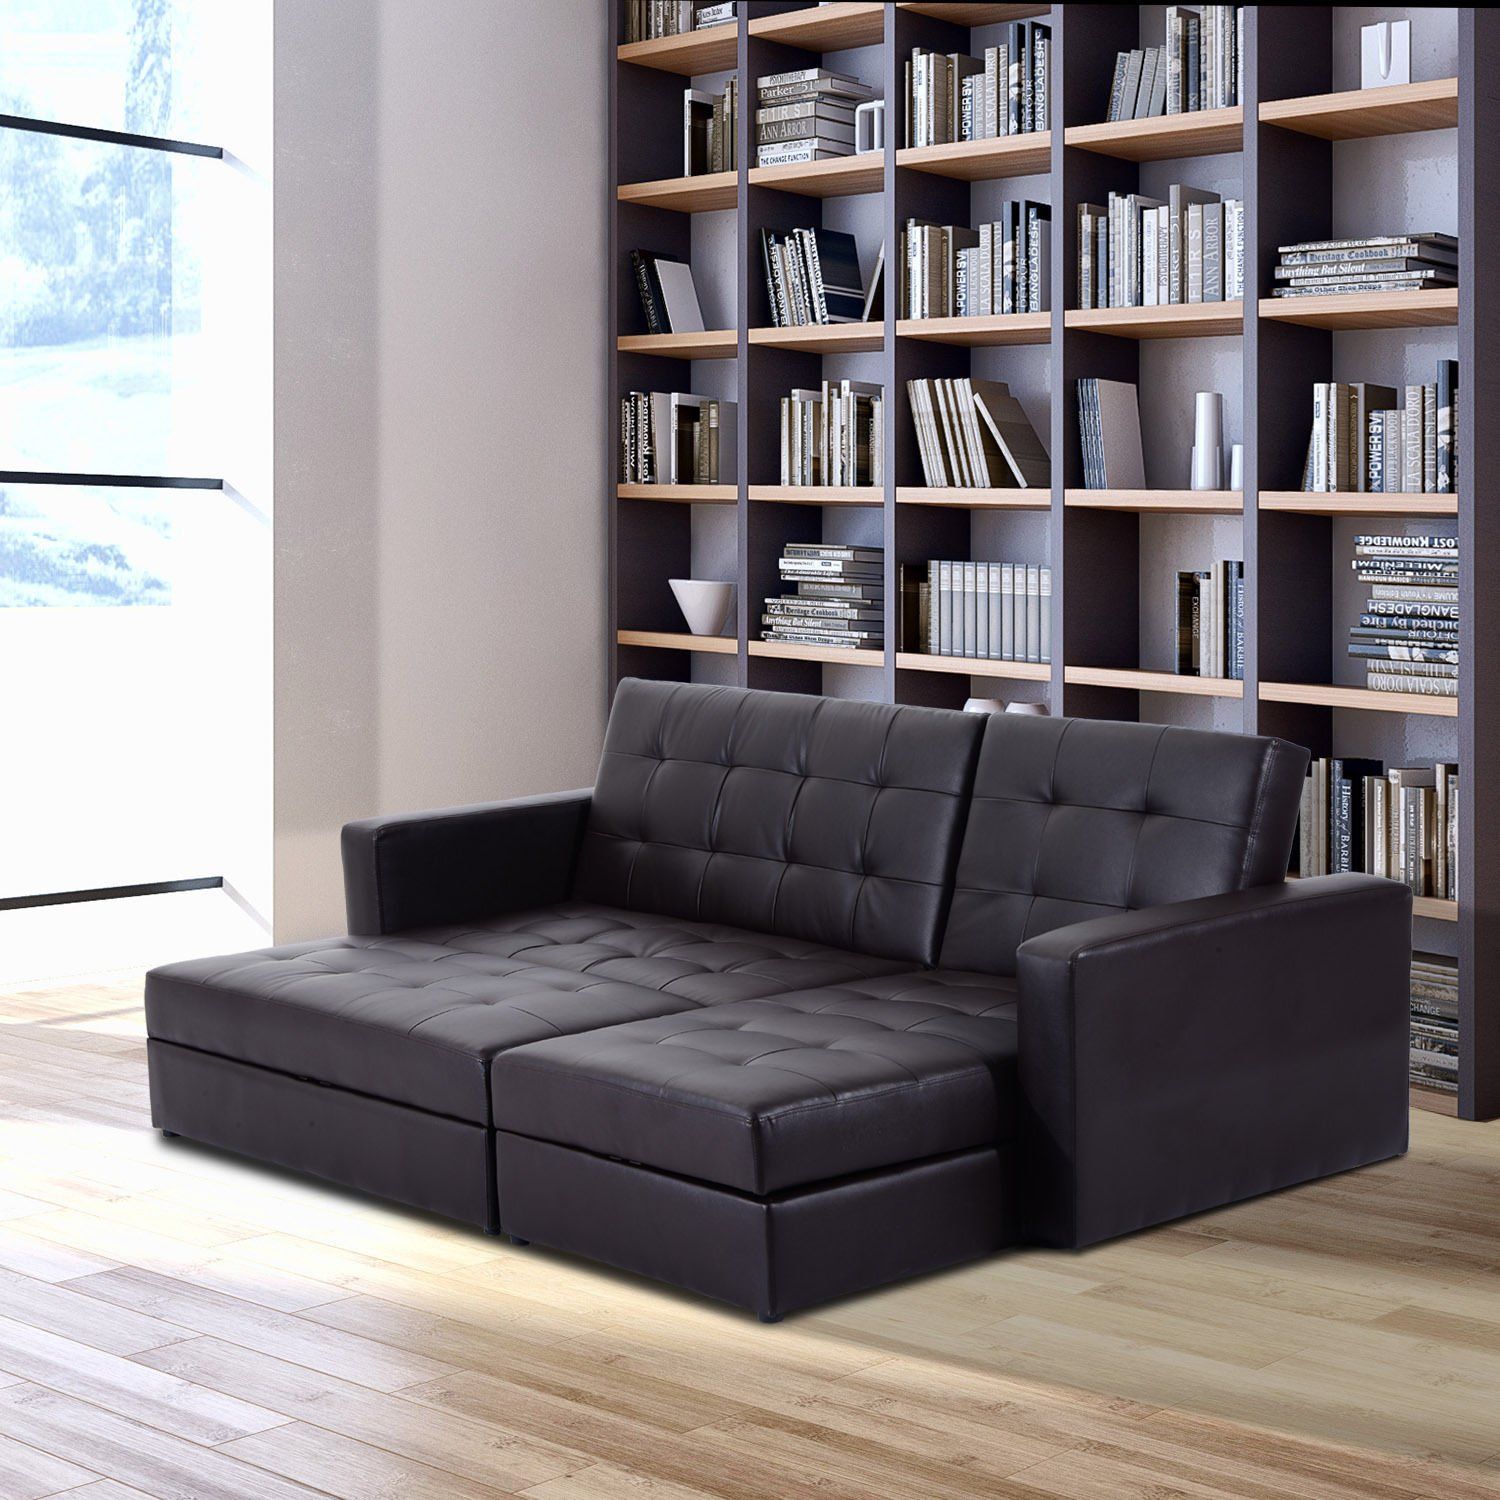 Storage+sleeper+couch+sofa+bed – Simply Style Inside Prato Storage Sectional Futon Sofas (View 7 of 15)